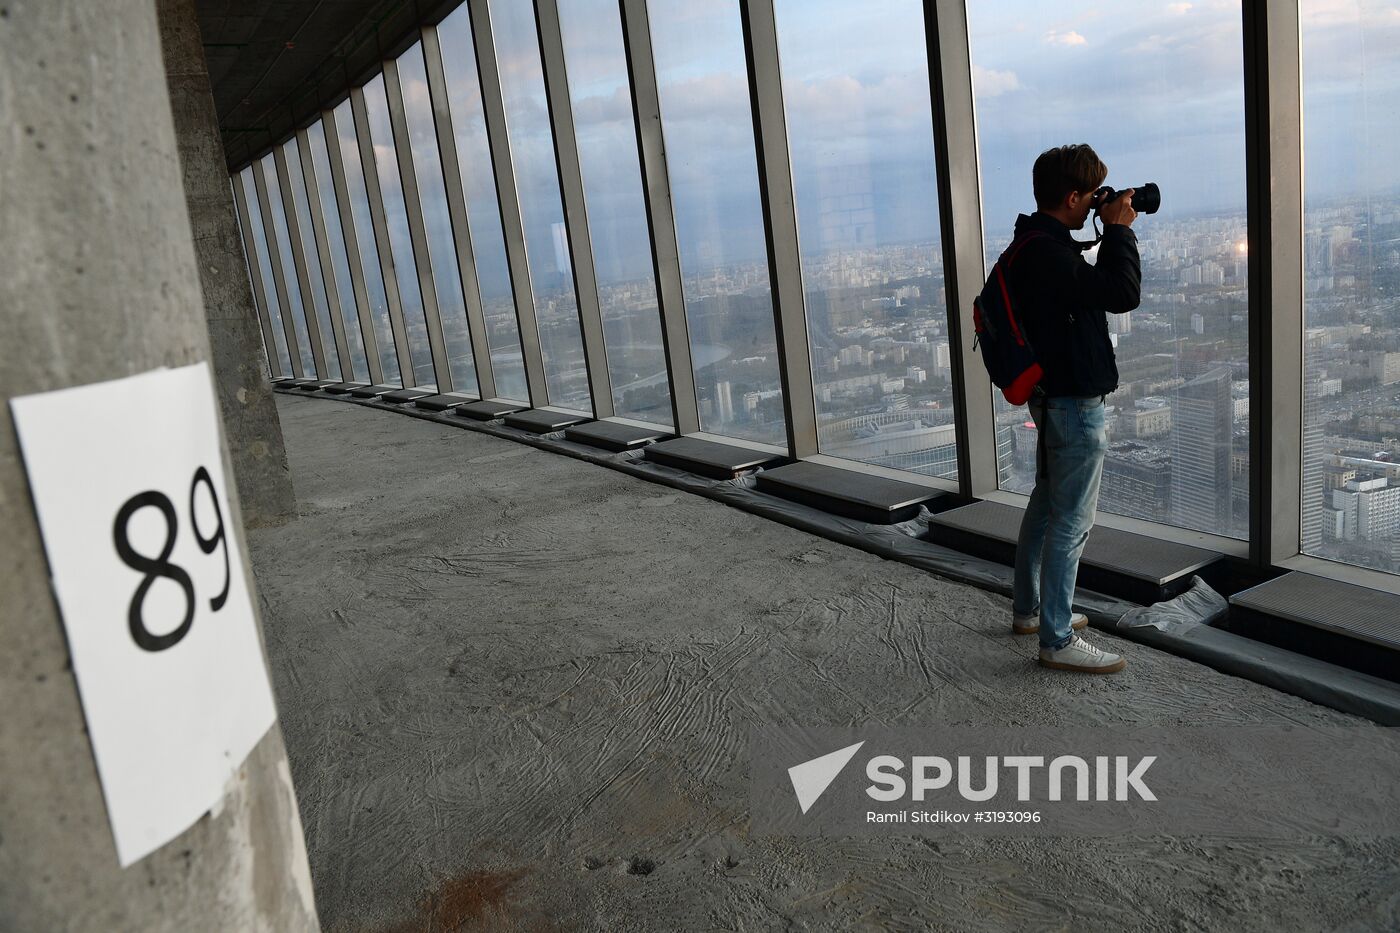 News conference on construction site of Europe's highest viewing platform